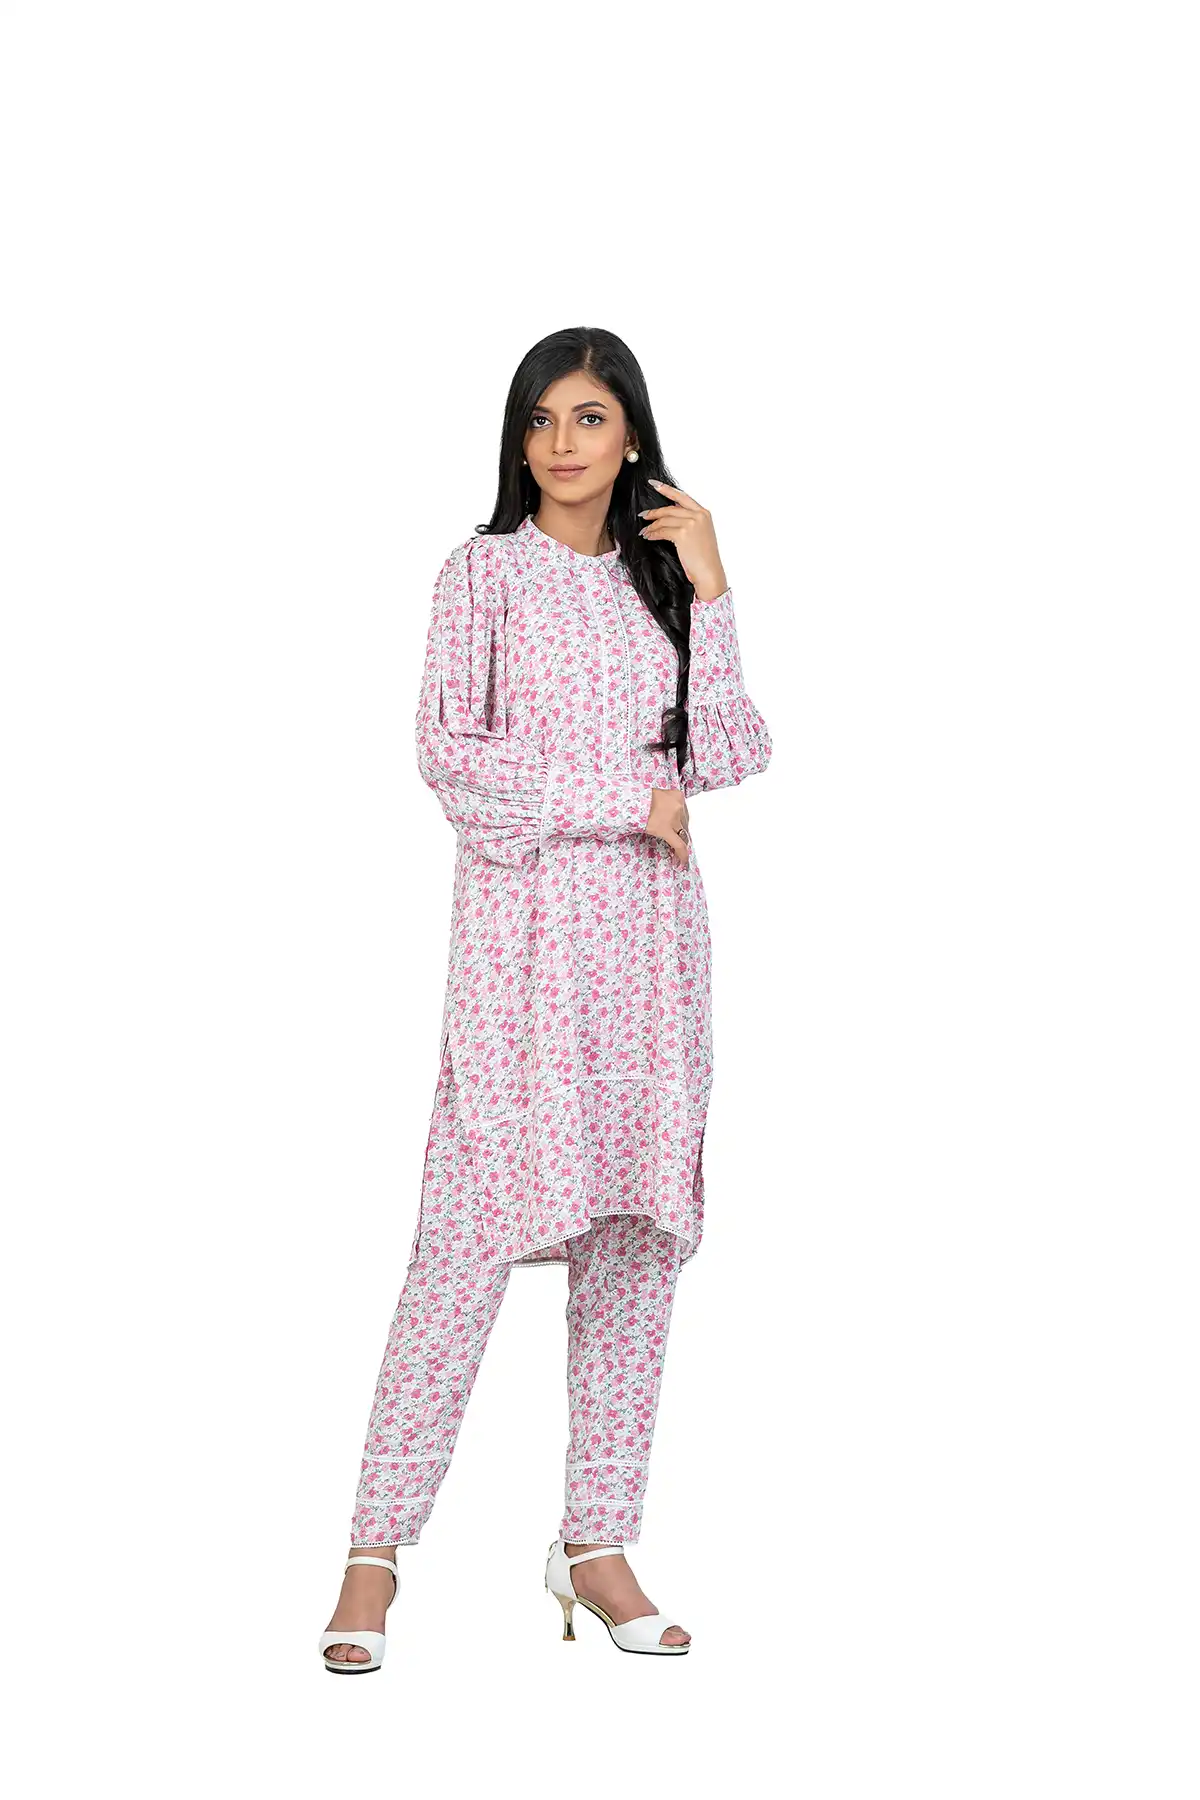 Women Floral Print Mandarin Collar Co-ord Set - White and baby pink (AOP)